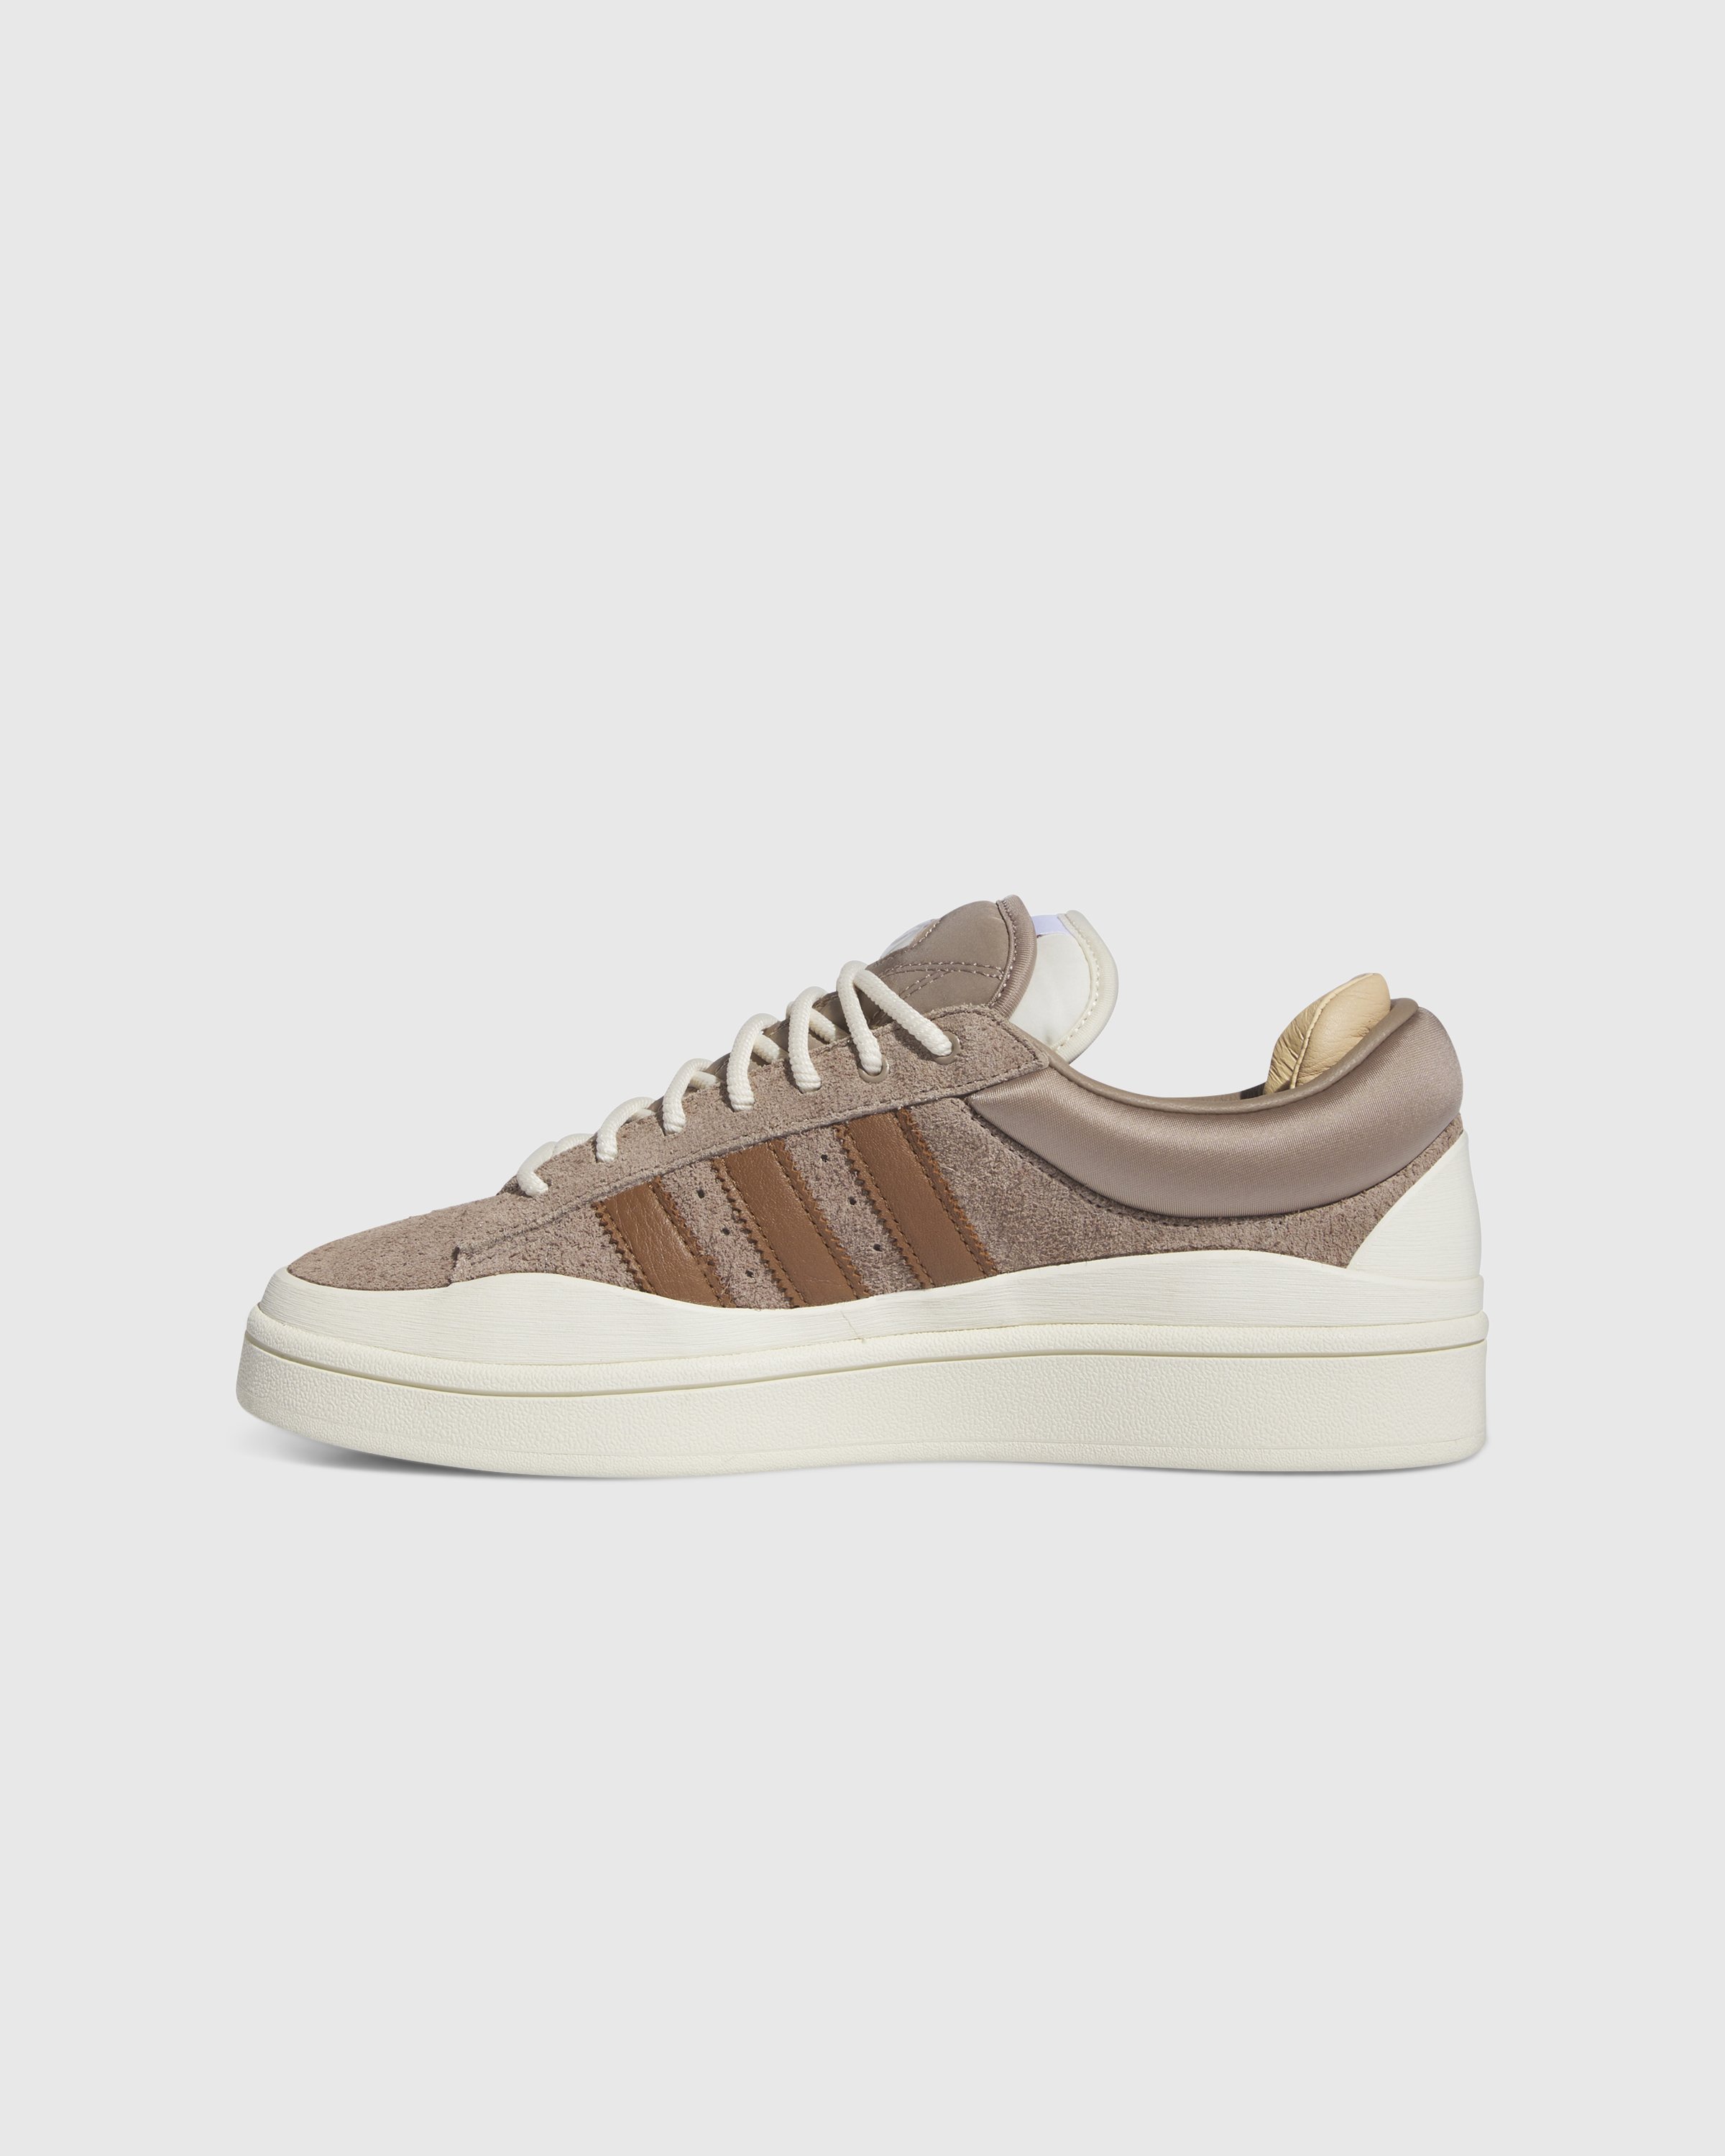 Adidas x Bad Bunny - Campus Chalky Brown - Footwear - White - Image 2